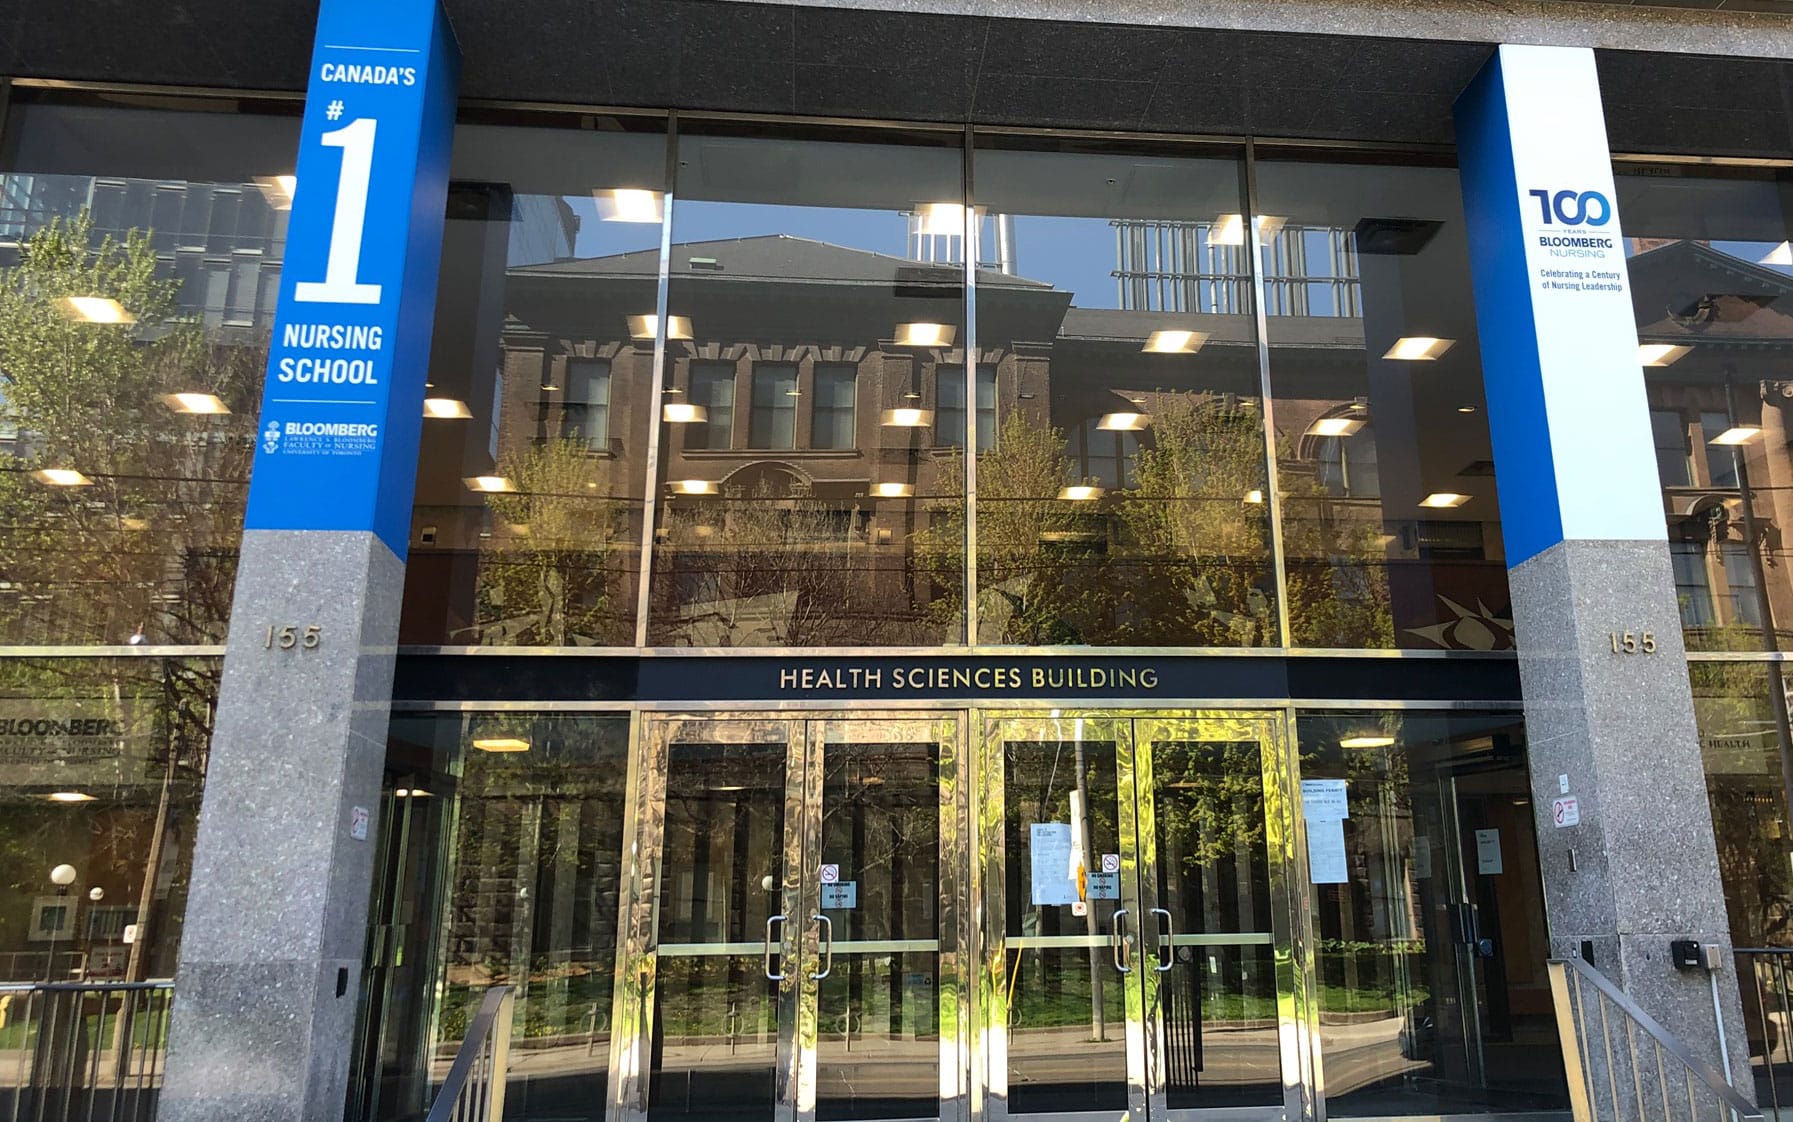 A street scene reflected in sparkling windows of the Bloomberg School of Nursing. Poster reads: Canada's #1 nursing school.